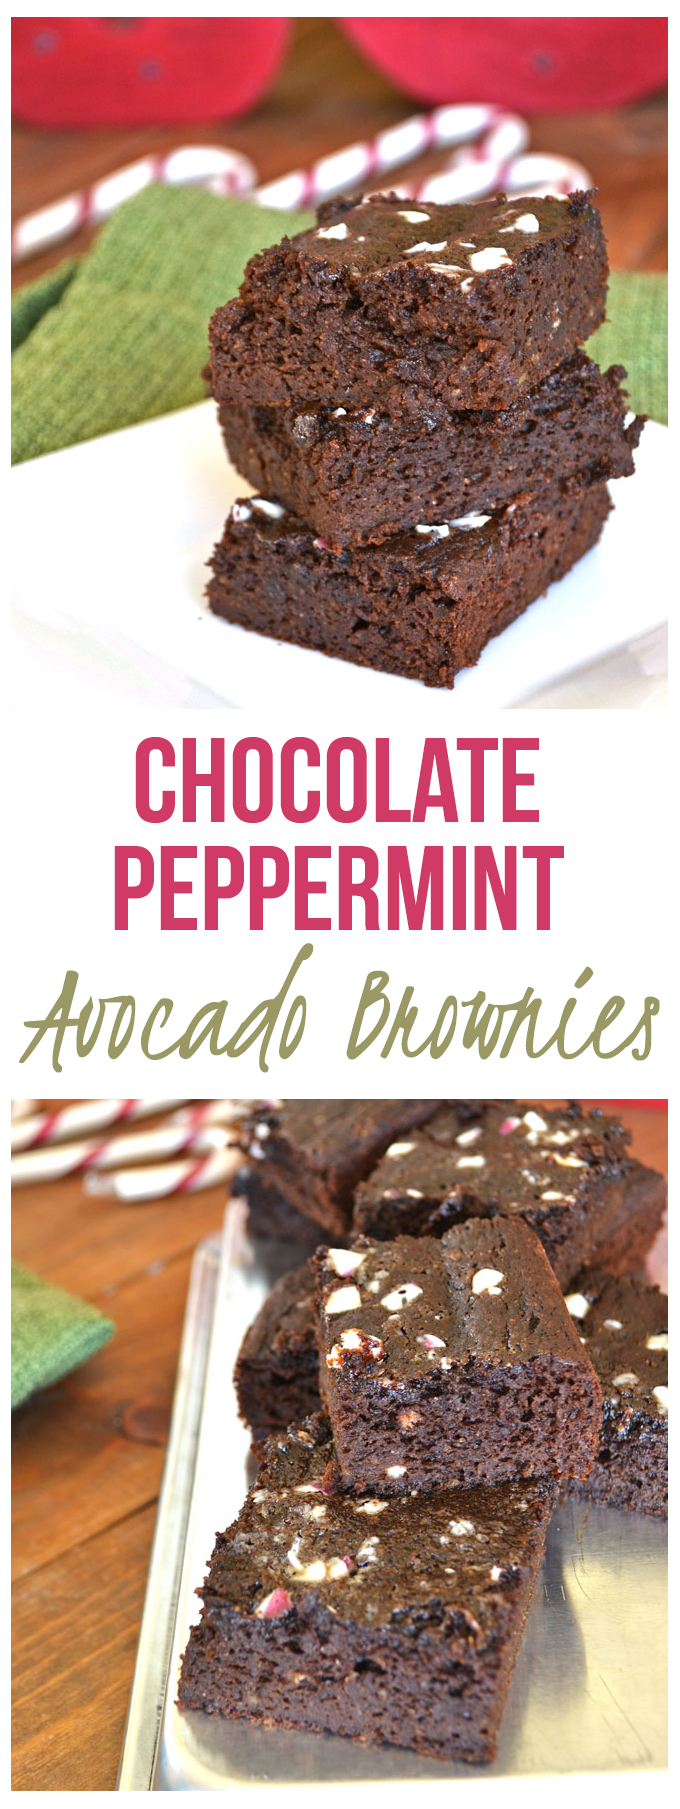 Chocolate Peppermint Avocado Brownies - whole wheat flour, avocado & cacao powder make these superfood brownies! Clean Ingredients and still the perfect mix of fudgey and cakey!